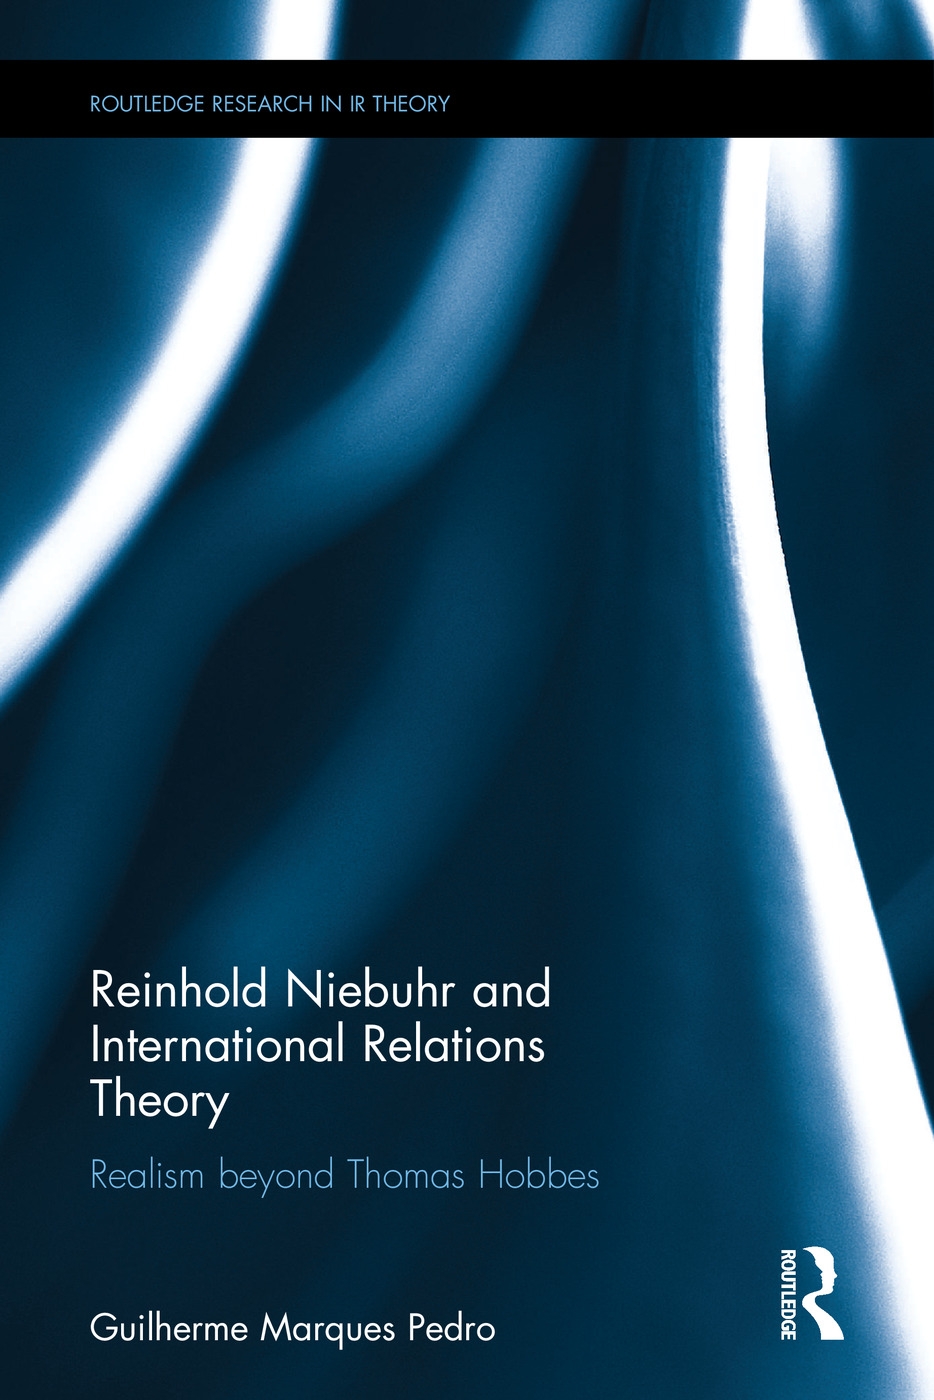 Reinhold Niebuhr and International Relations Theory: Realism Beyond Thomas Hobbes